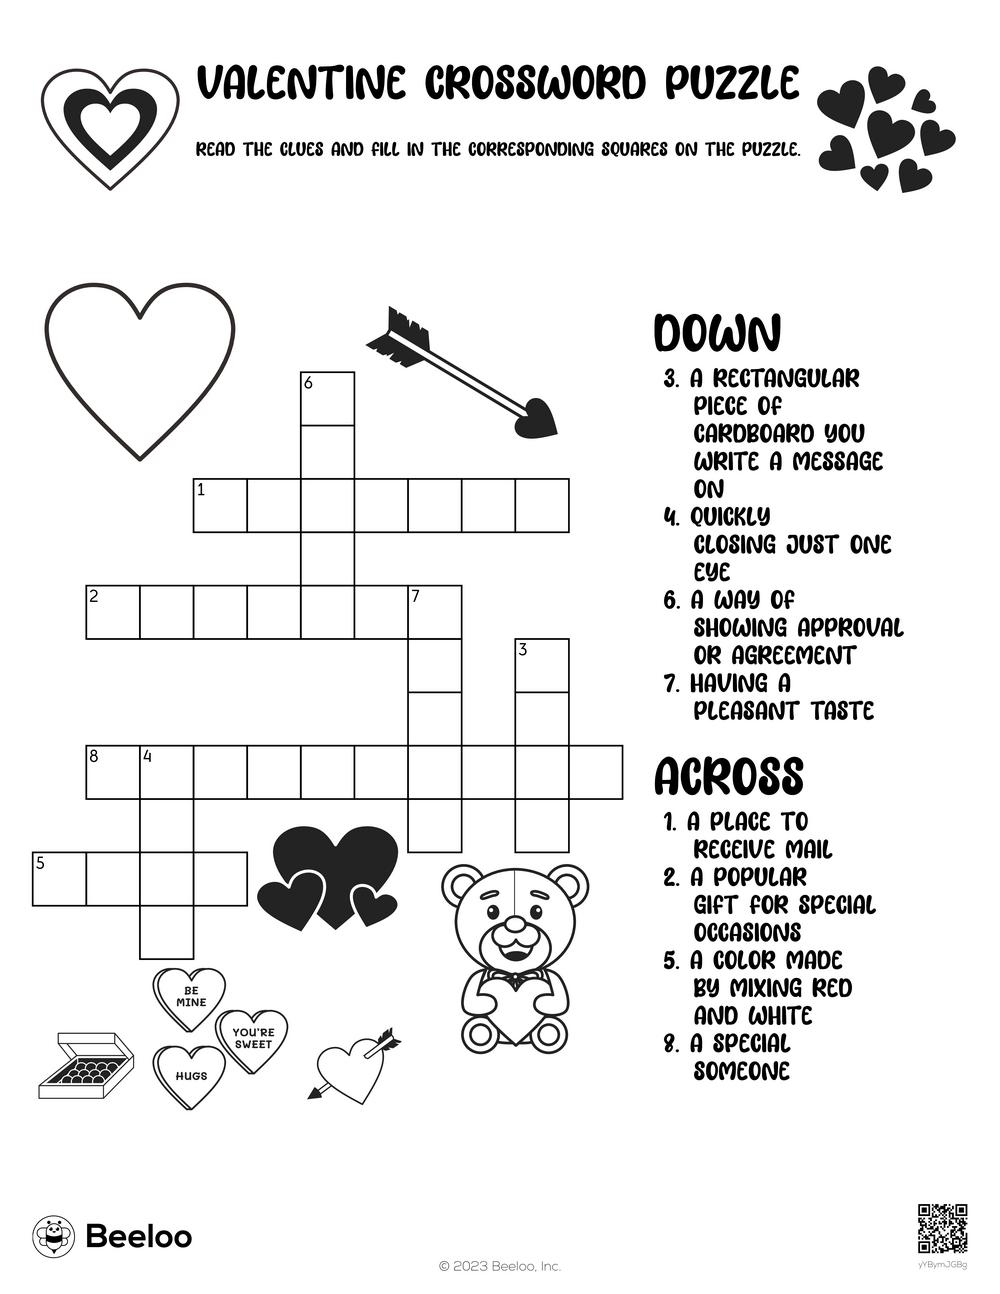 Valentine crossword puzzle â printable crafts and activities for kids